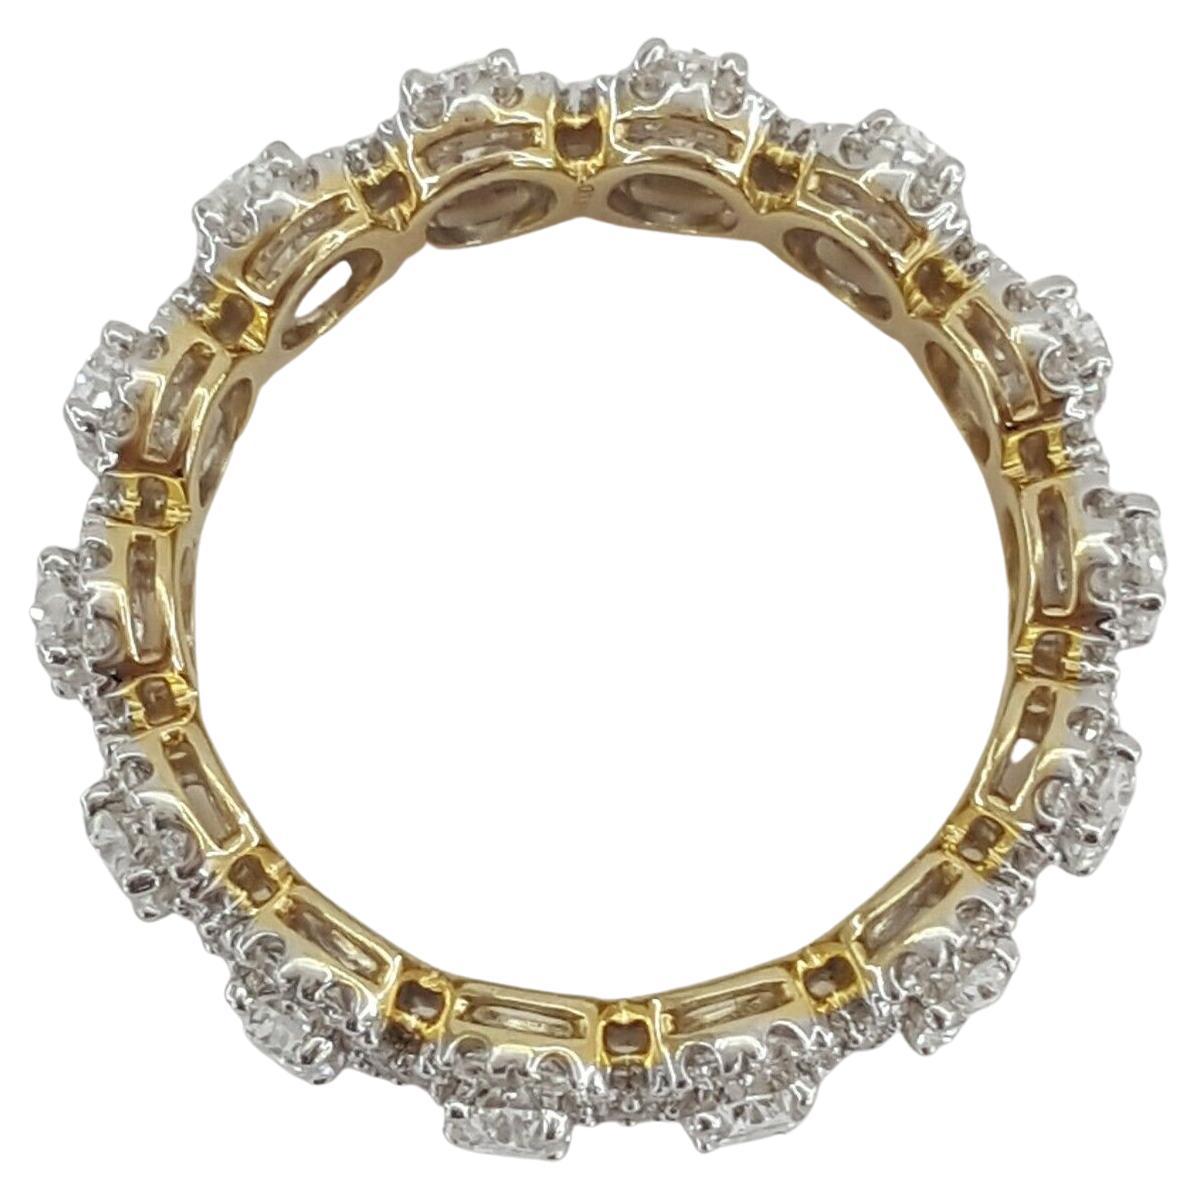 An exquisite yellow gold oval brilliant cut halo diamond full circle eternity wedding band ring.

The ring weighs 4 grams, size 7, there are 14 Natural Oval Brilliant Cut Diamonds weighing approximately 1.9 ct total weight